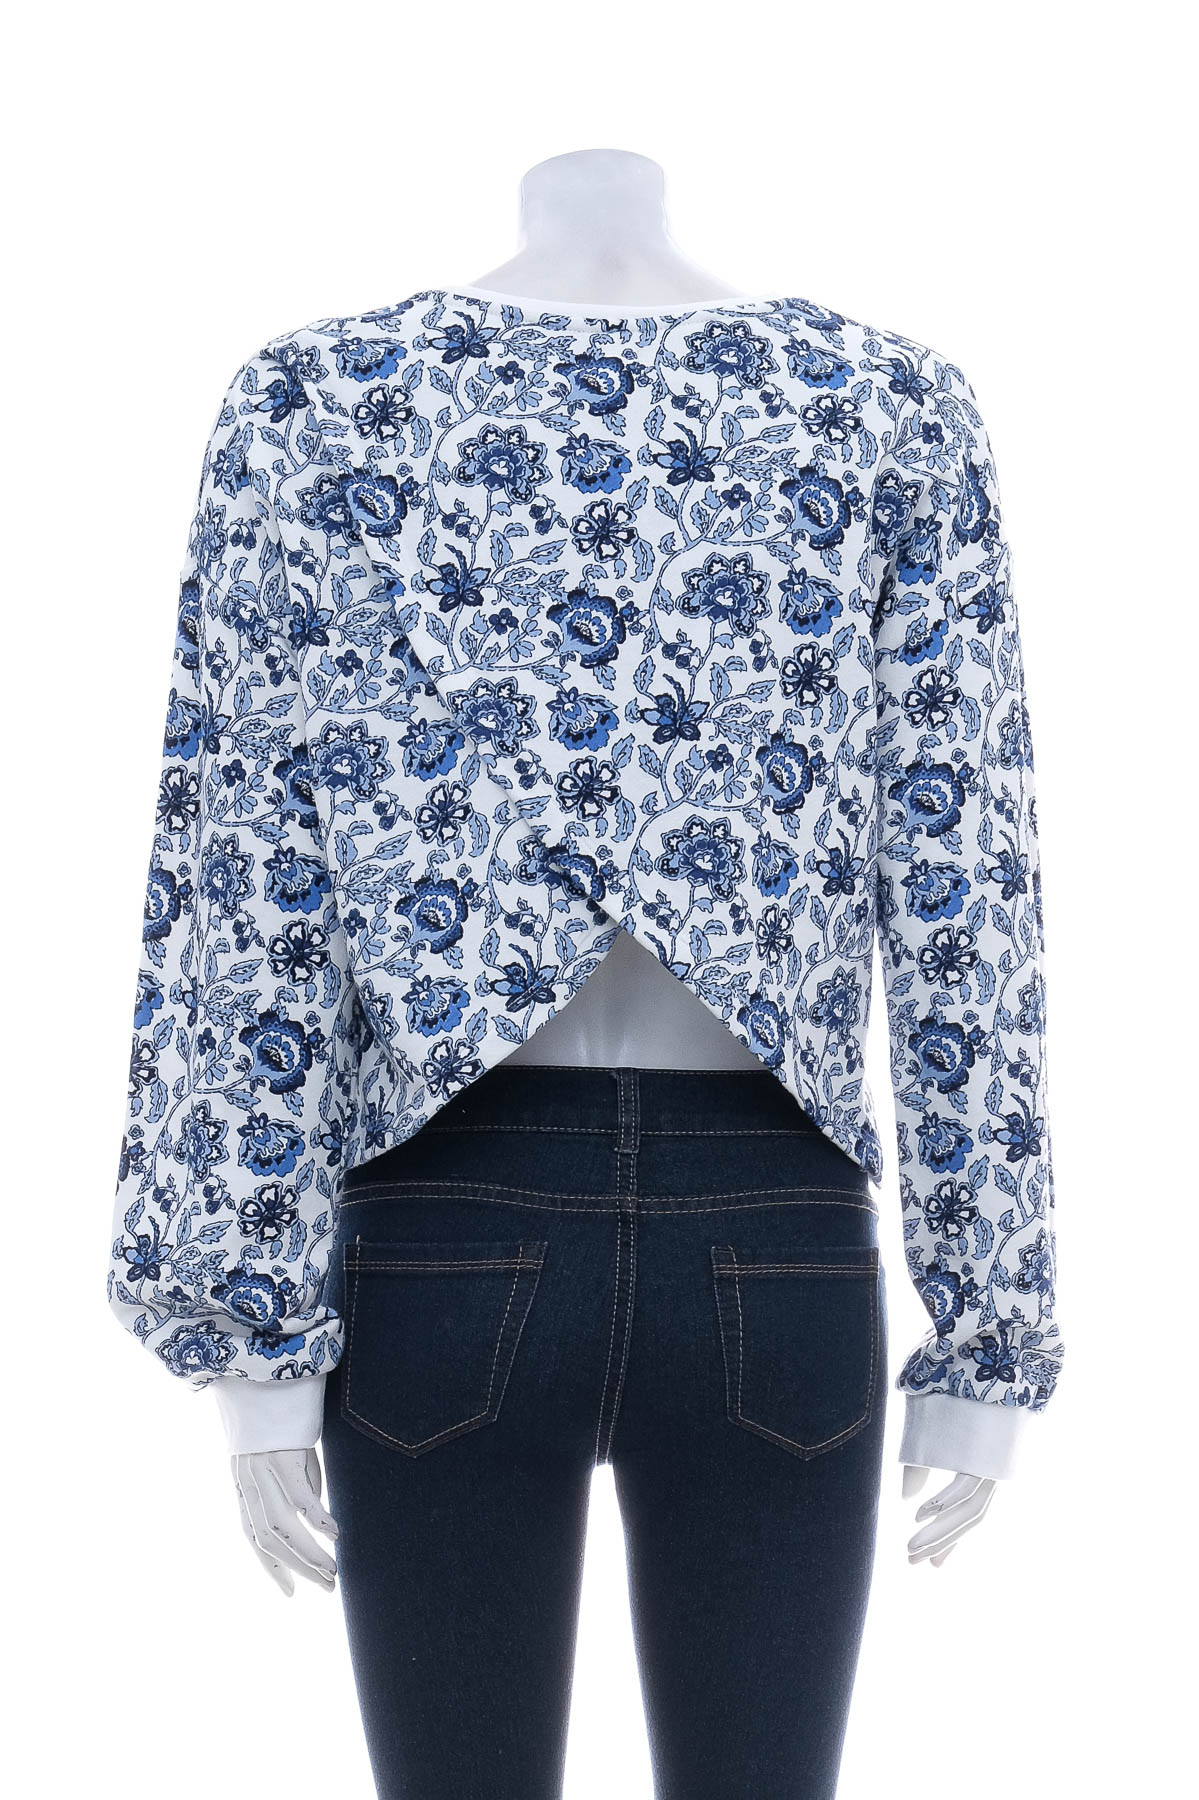 Girls' blouse - Pepe Jeans - 1